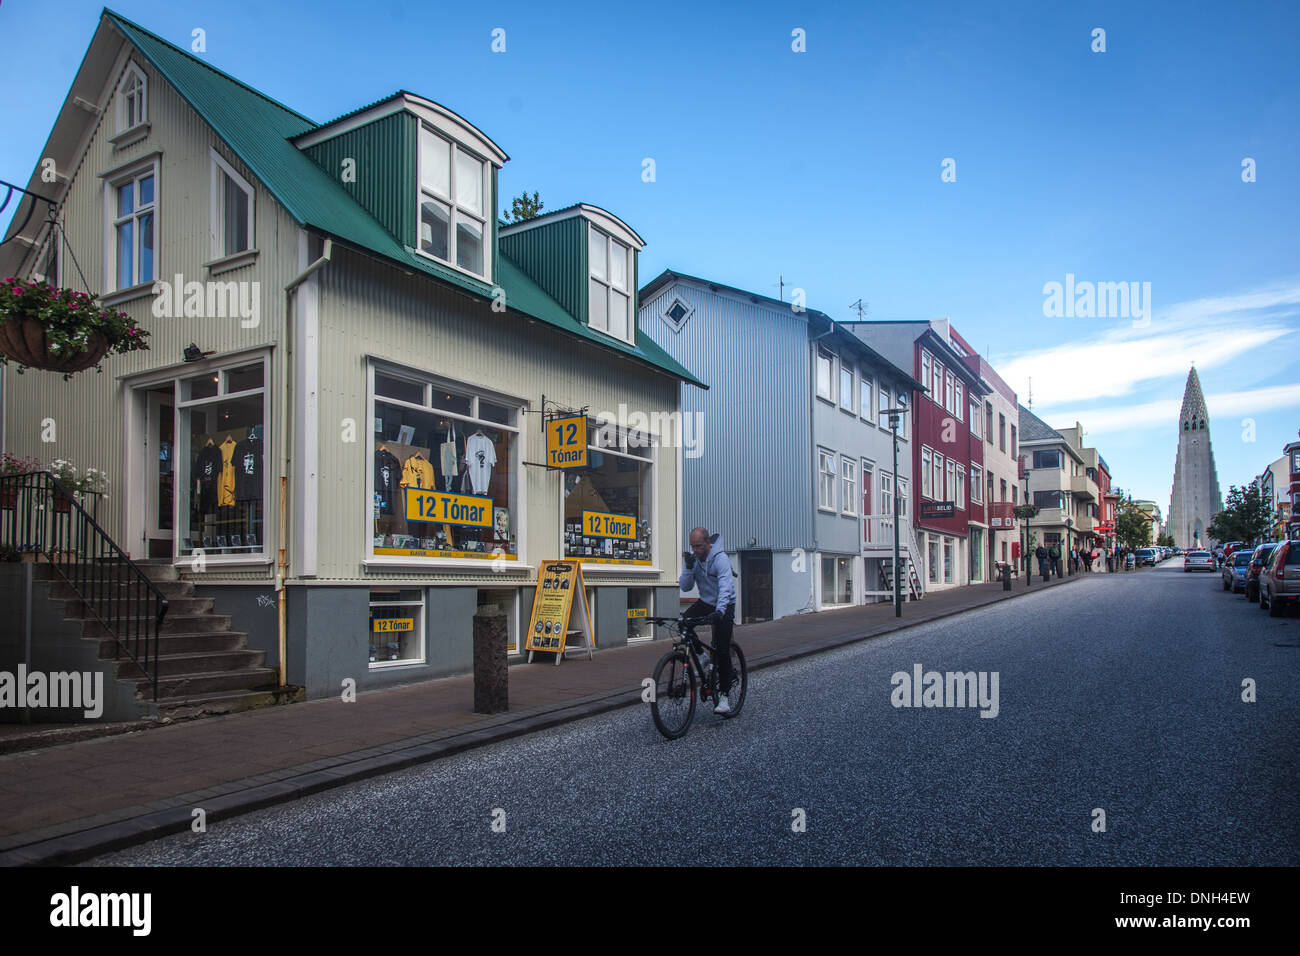 RECORD SHOP TONAR, STORE ON SKOLAVORDUSTIGUR STREET WHICH GOES UP TO THE  LUTHERAN CATHEDRAL HALLGRIMSKIRKJA, REYKJAVIK, CAPITAL OF ICELAND, SOUTHERN  ICELAND, EUROPE Stock Photo - Alamy